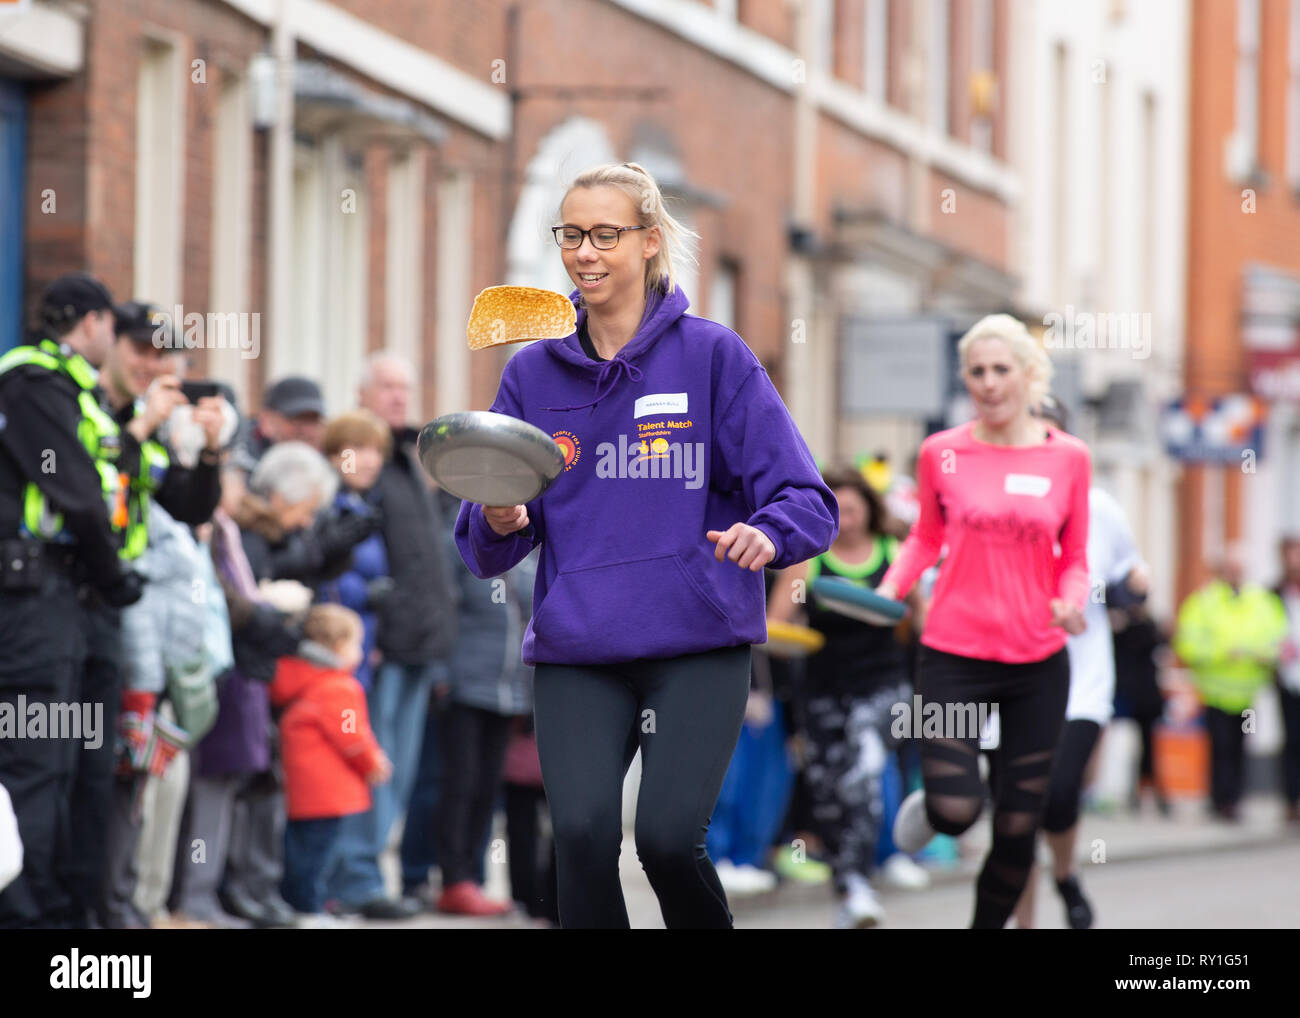 The annual Shrove Tuesday pancake race taking place in Bore Street, Lichfield, England, UK Stock Photo